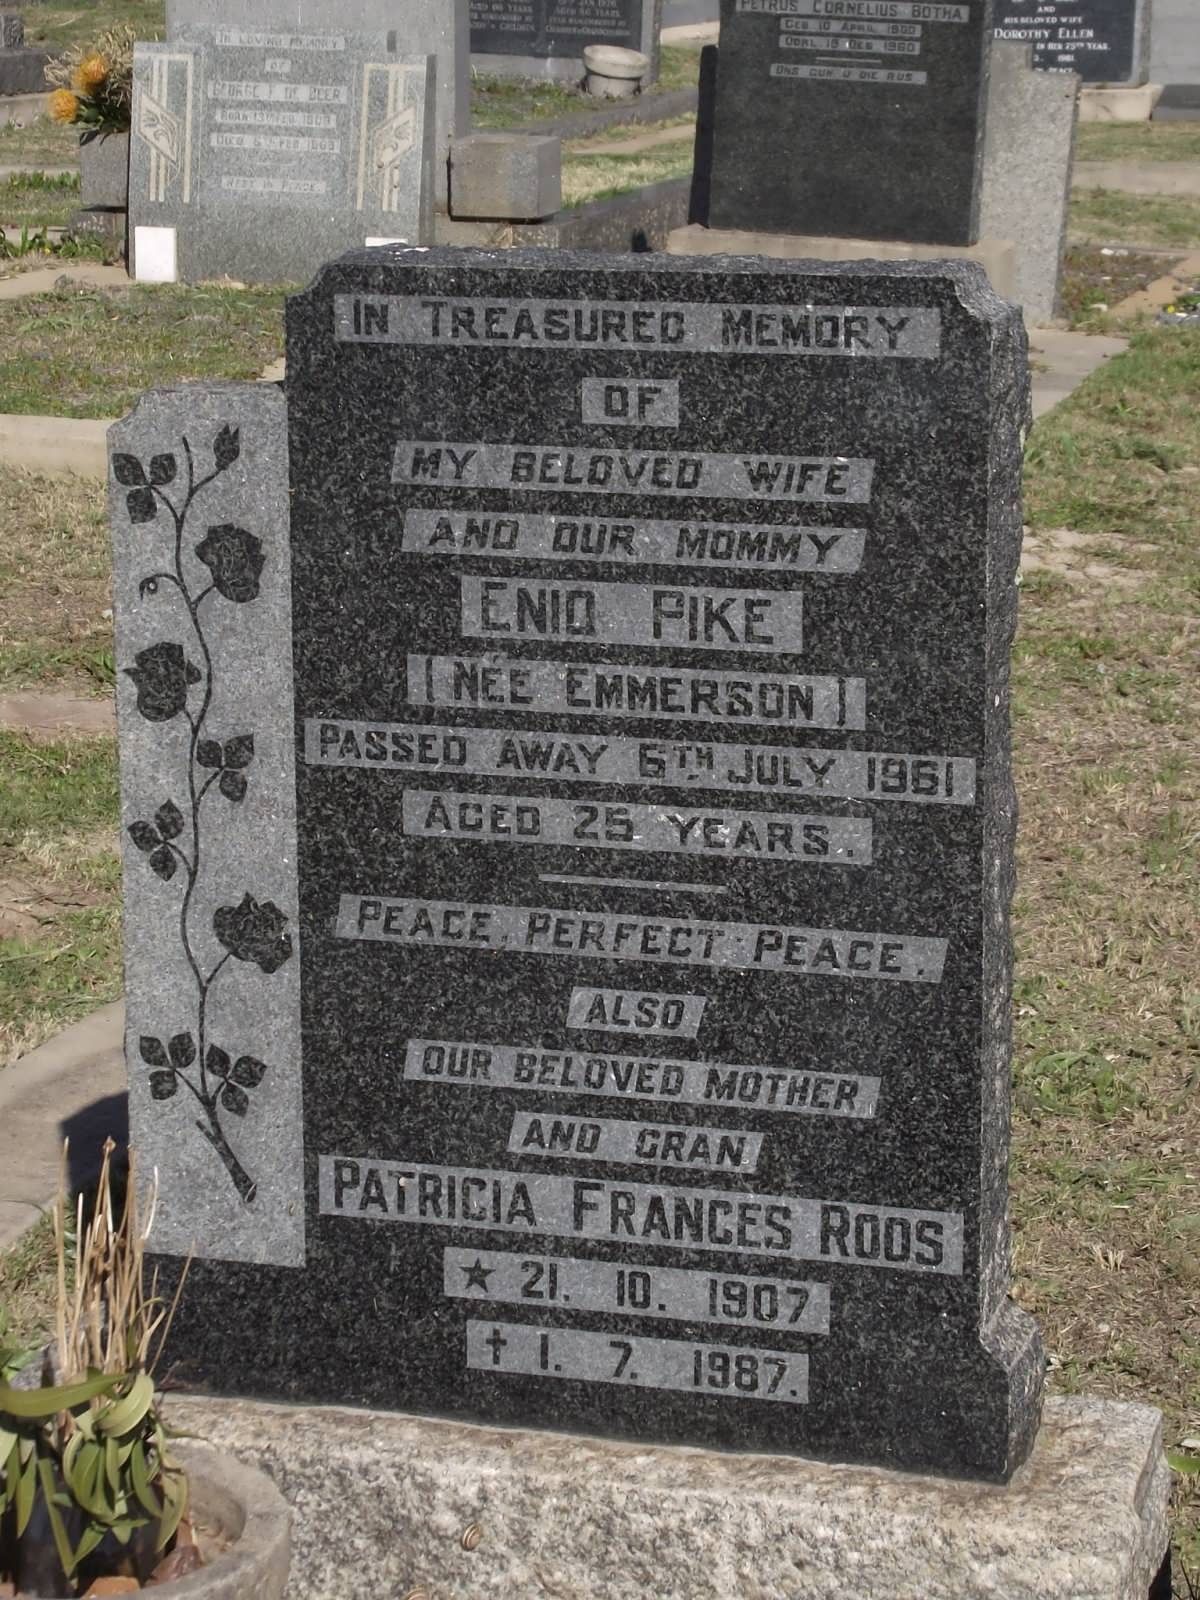 PIKE Enid nee EMMERSON -1961 :: ROOS Patricia Francis 1907-1987